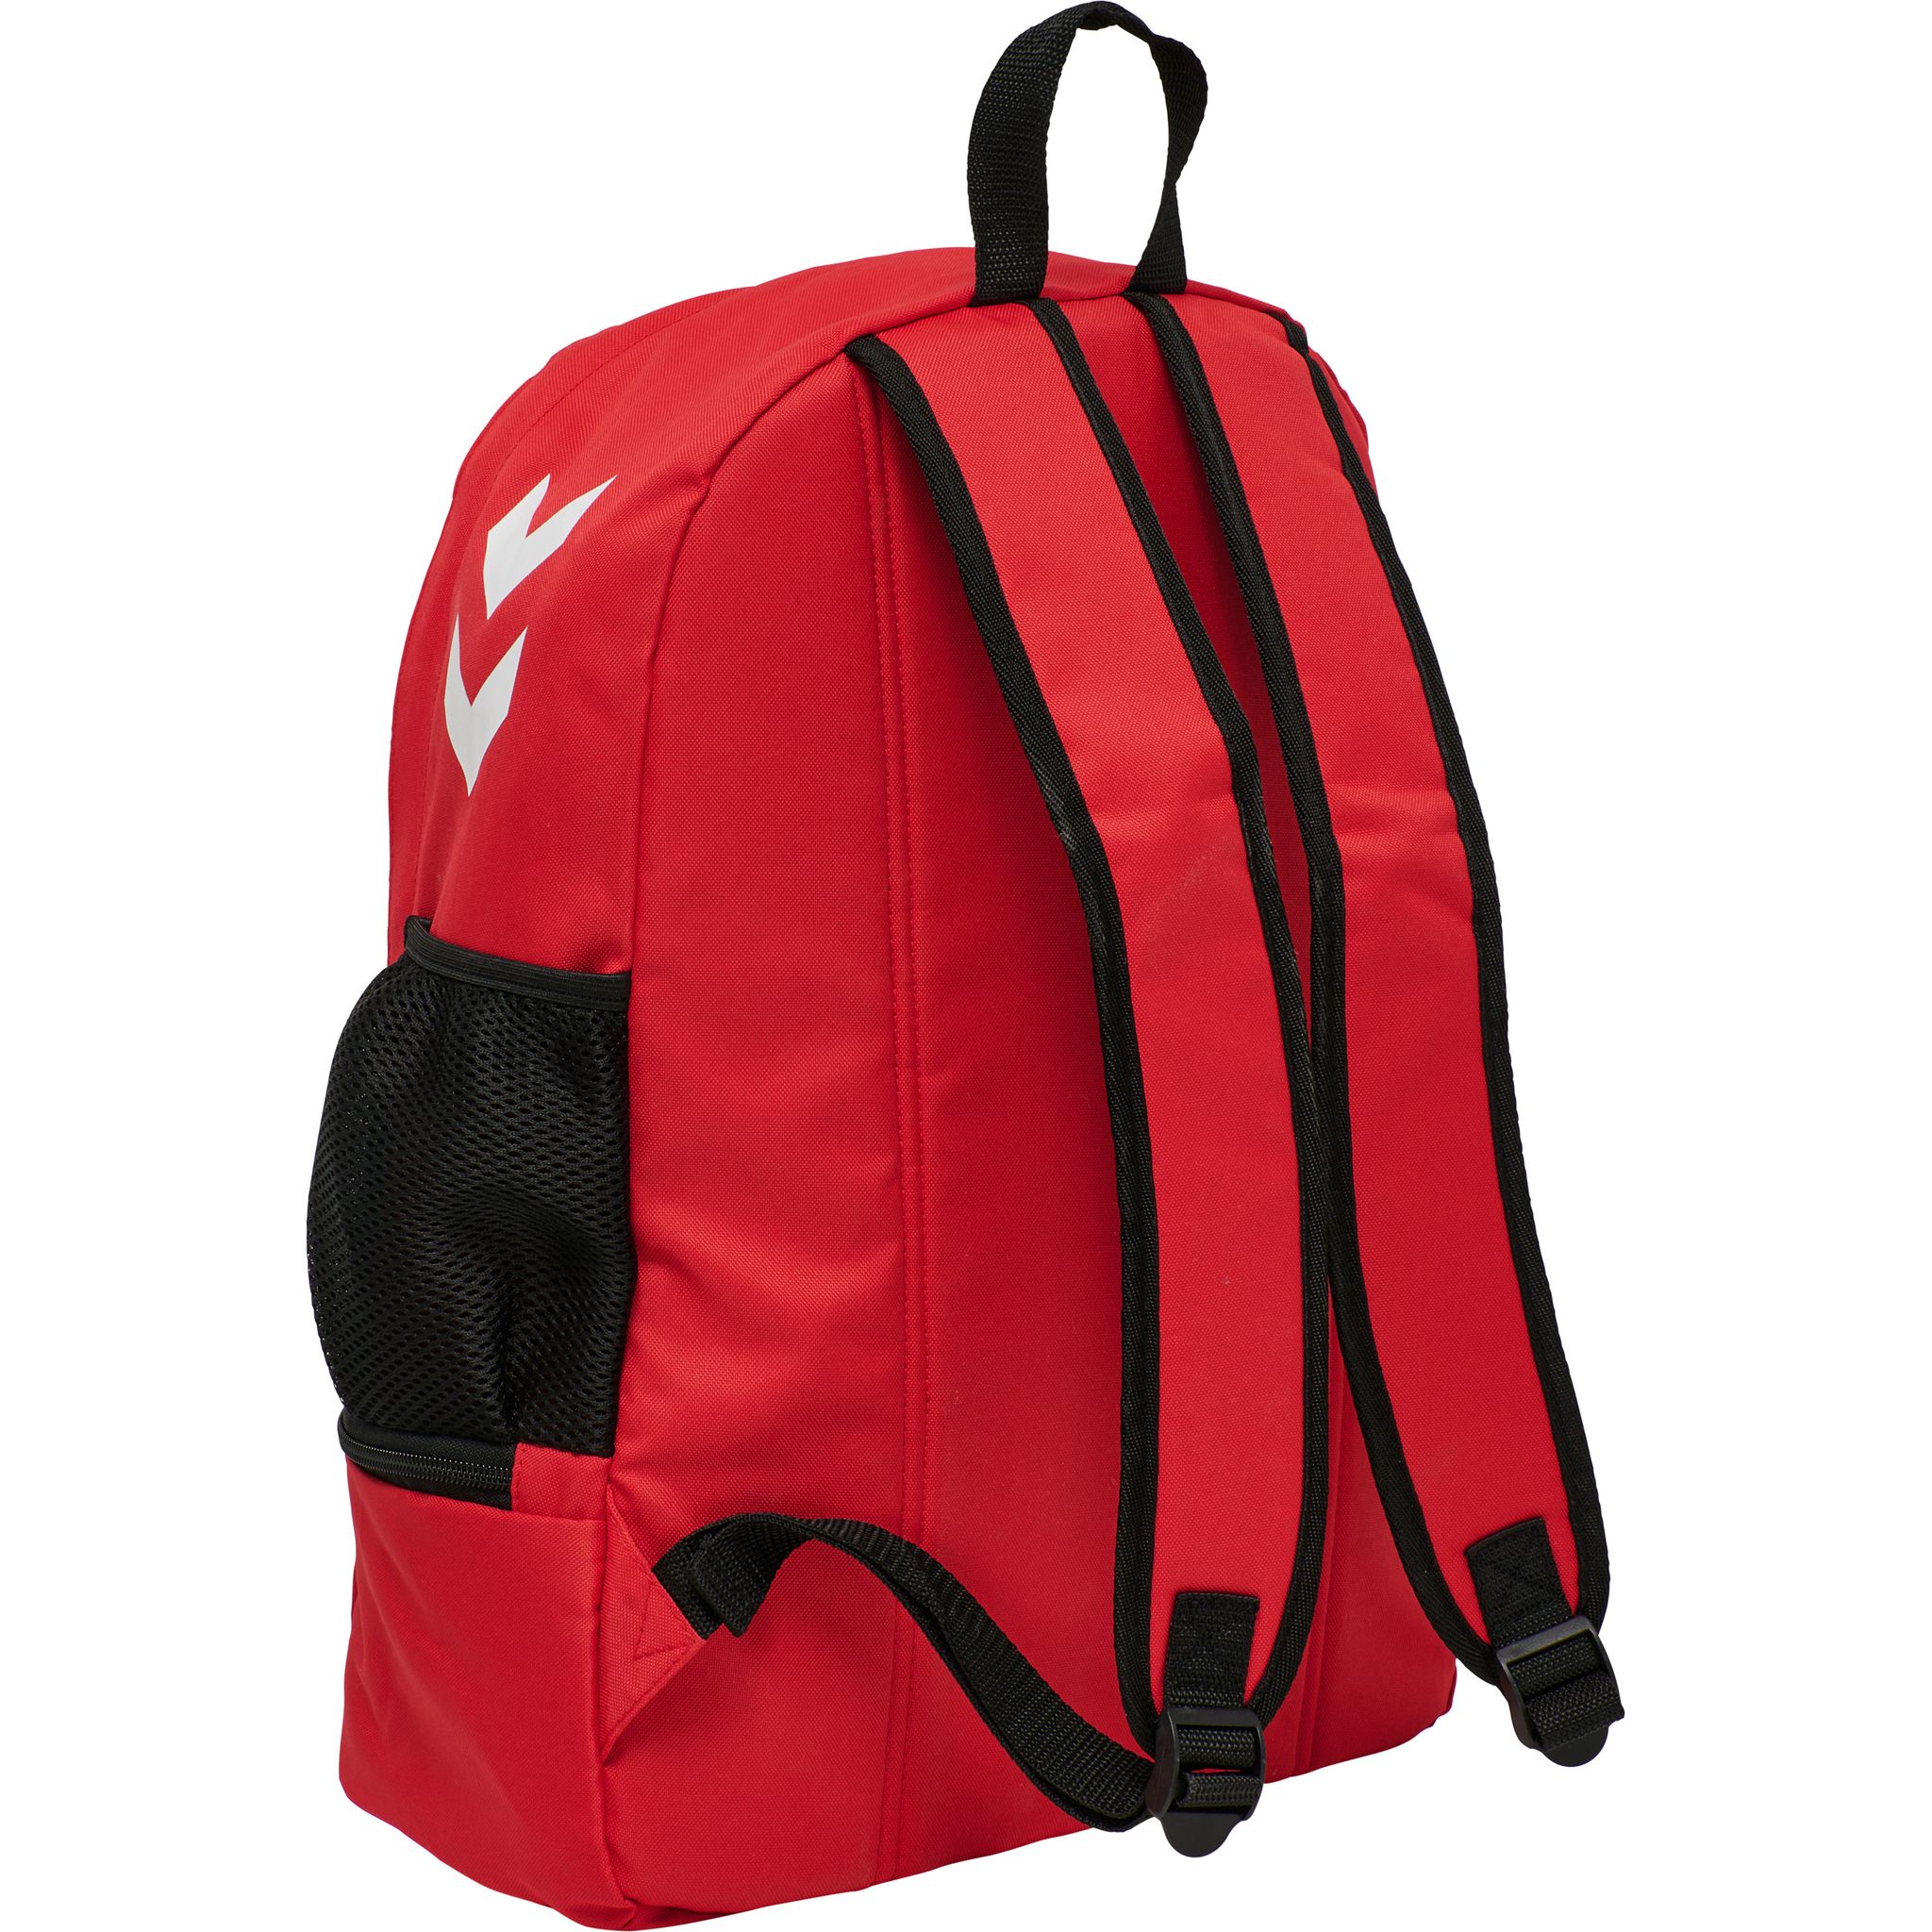 hmlPROMO BACK PACK